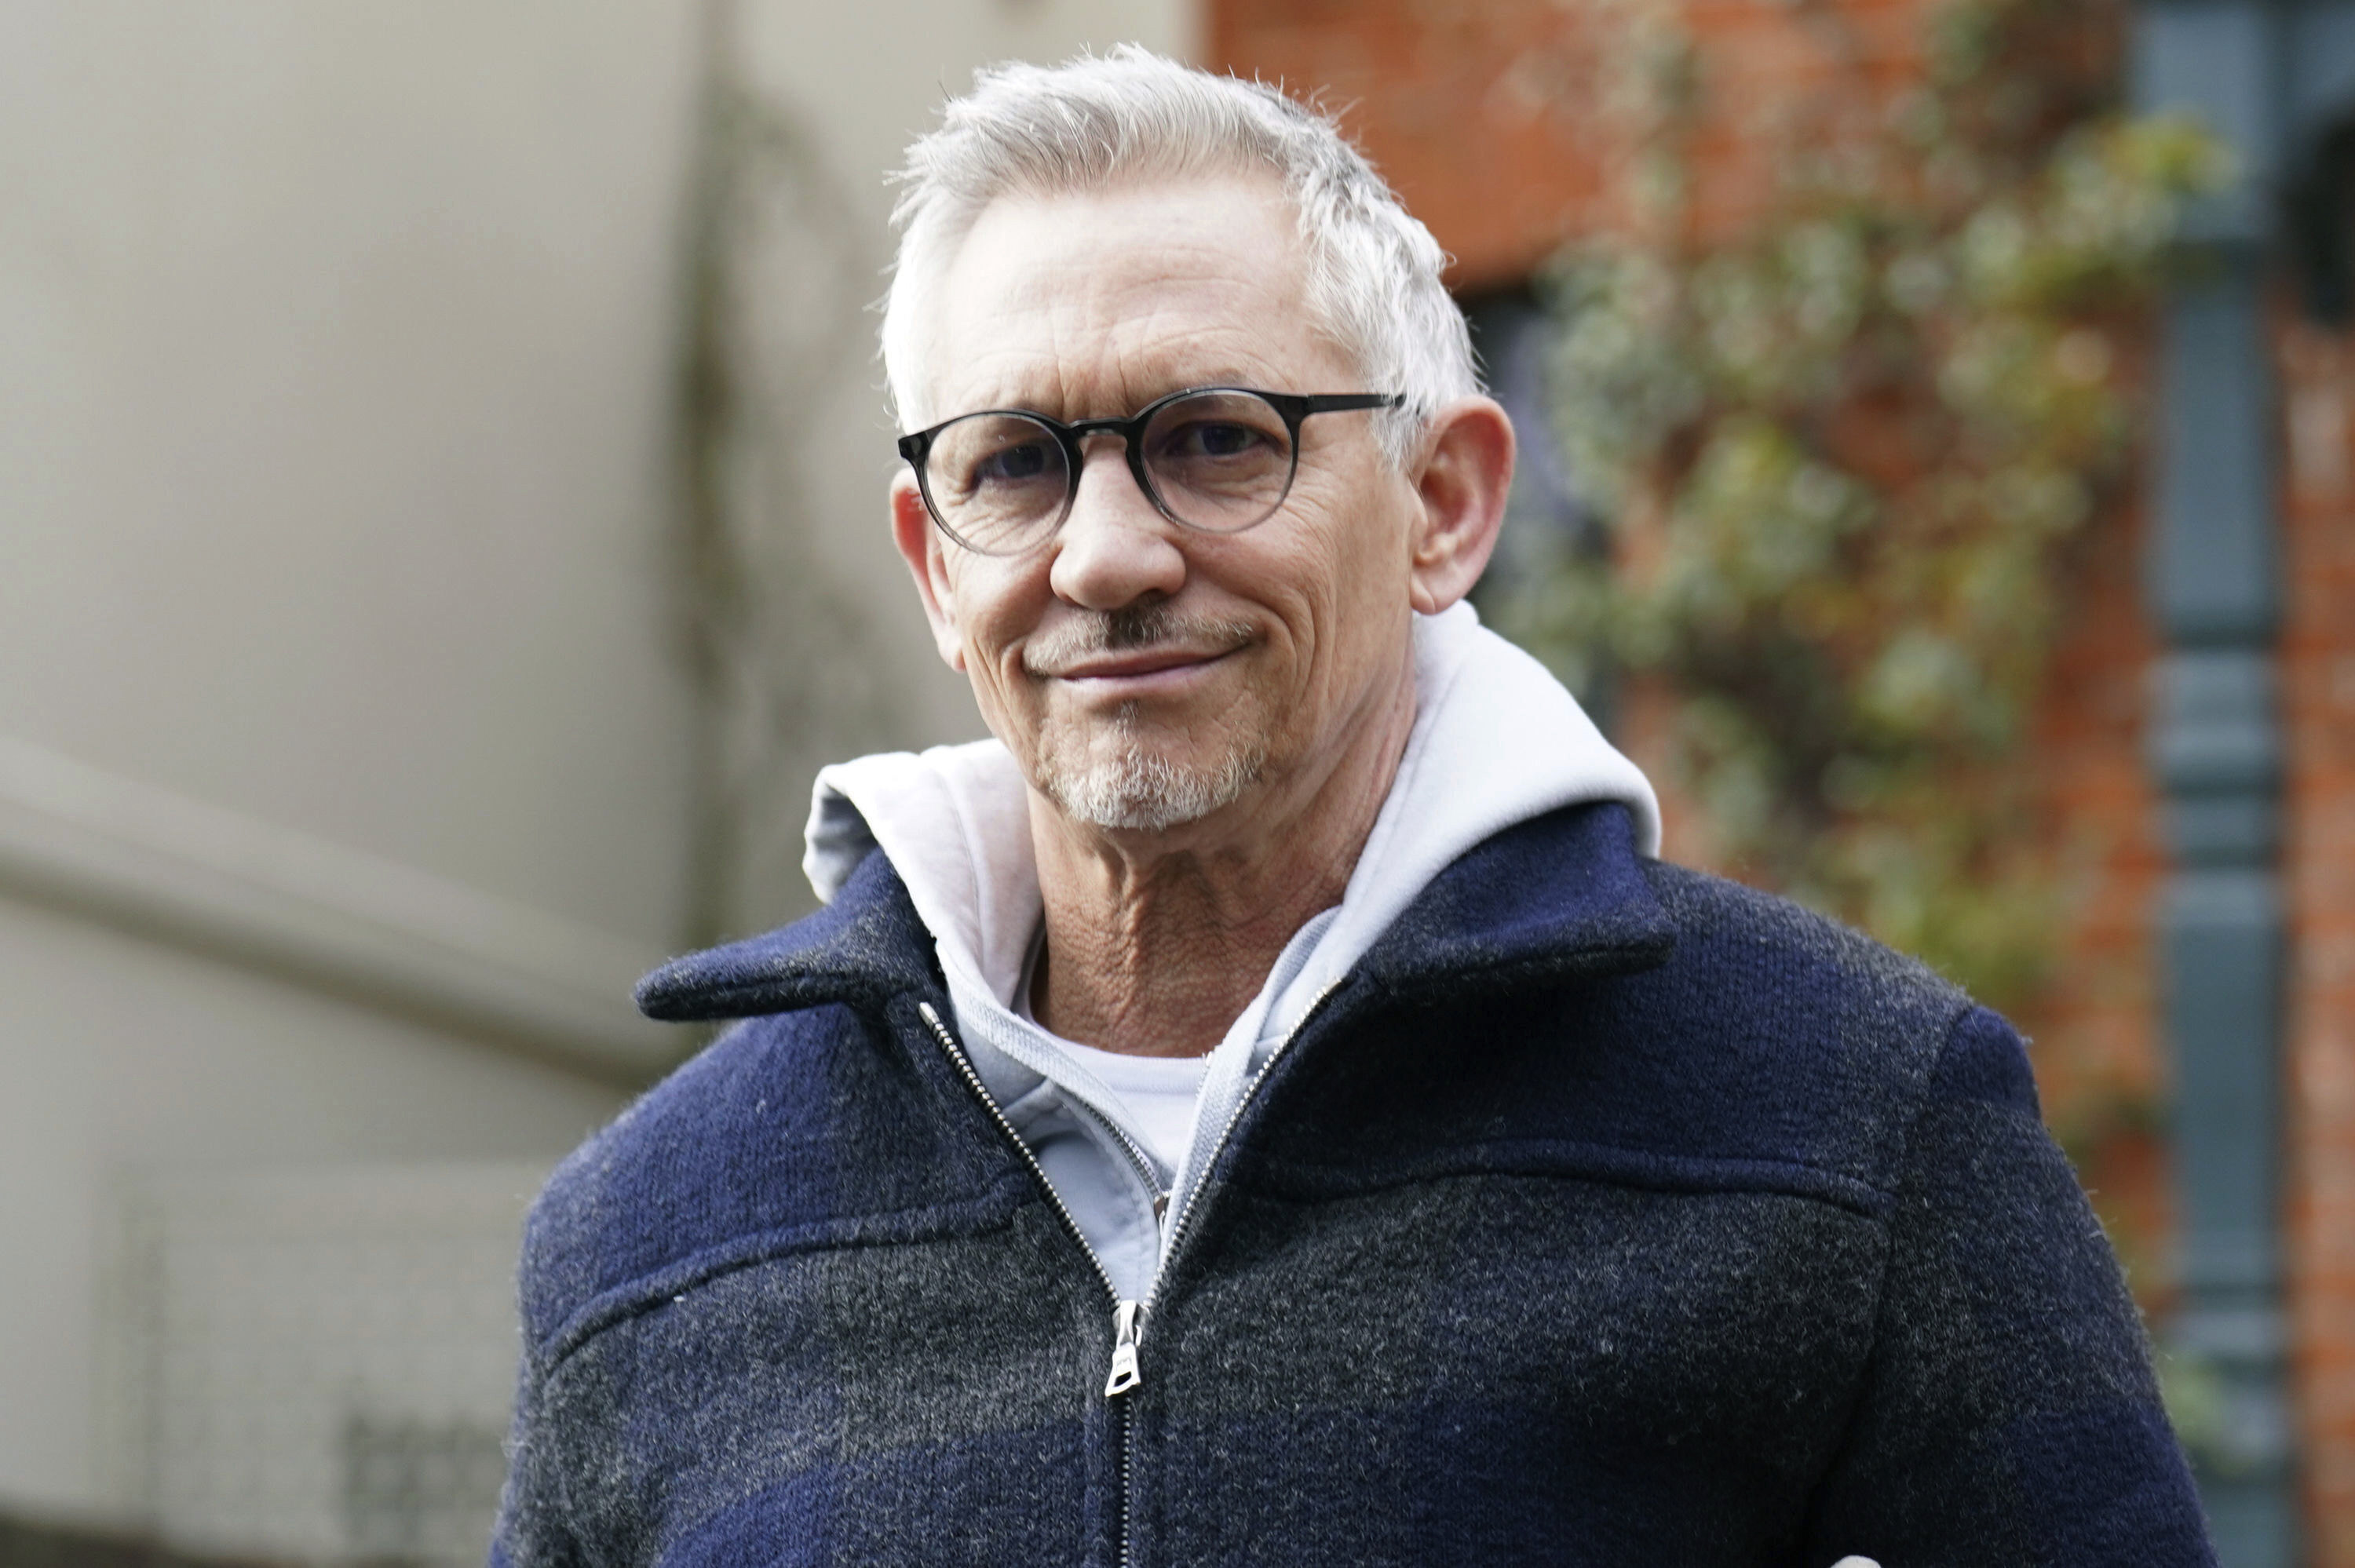 British soccer broadcaster Gary Lineker is seen in London on Monday. Photo: PA via AP